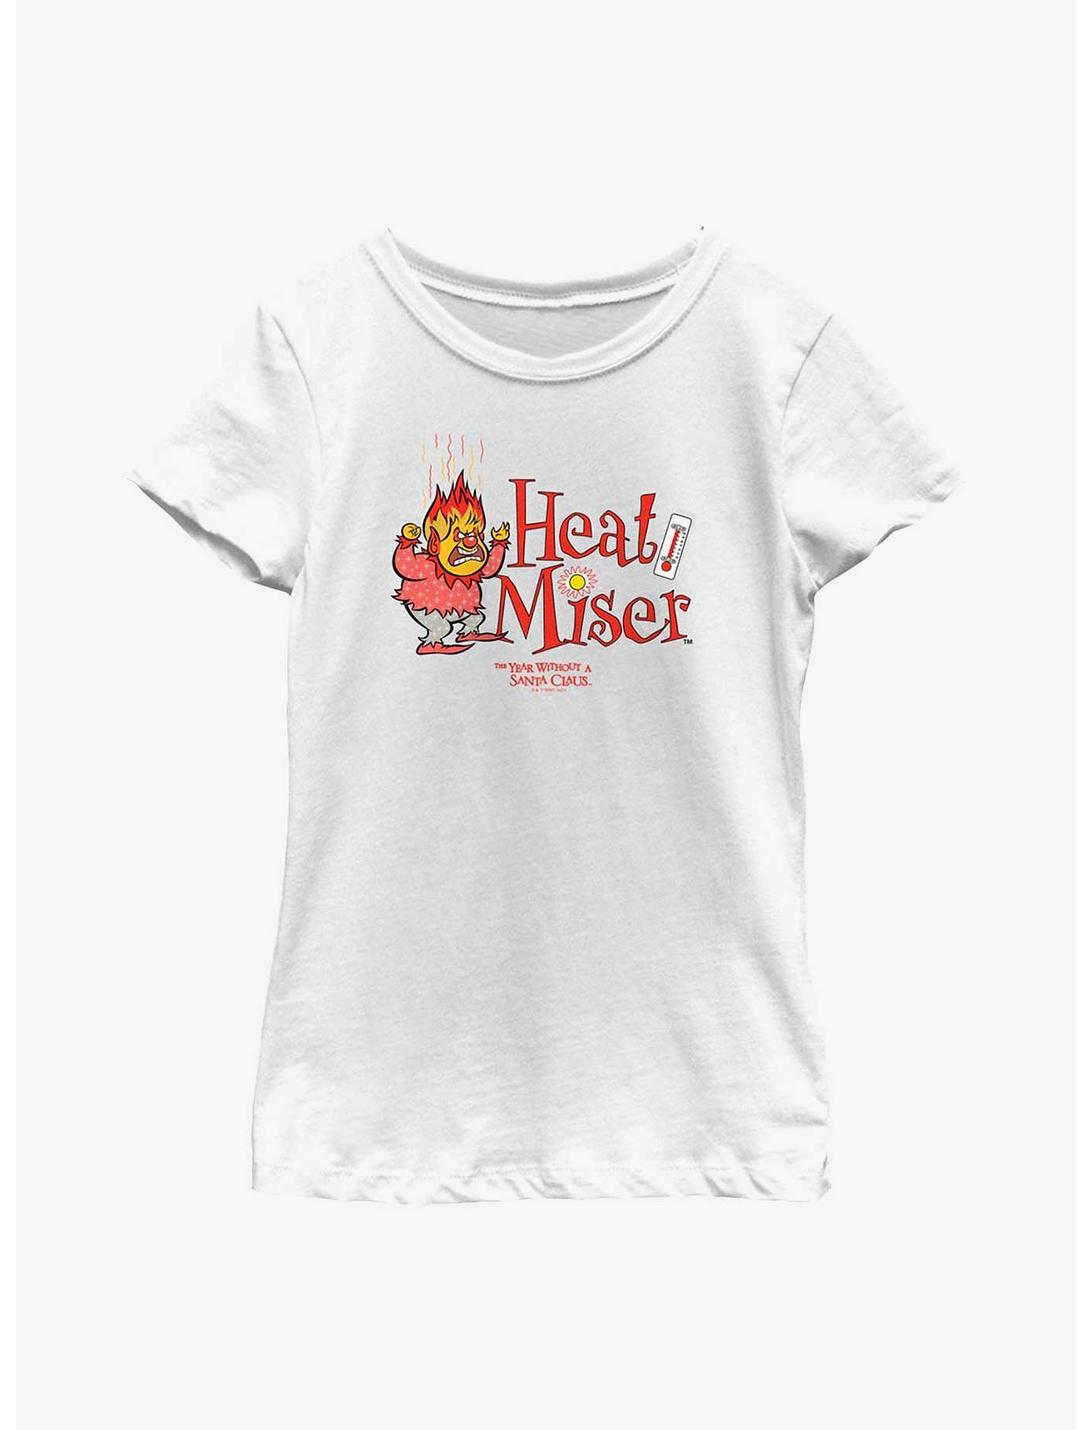 The Year Without Santa Claus Heat Miser Youth Girls T-Shirt, WHITE, hi-res